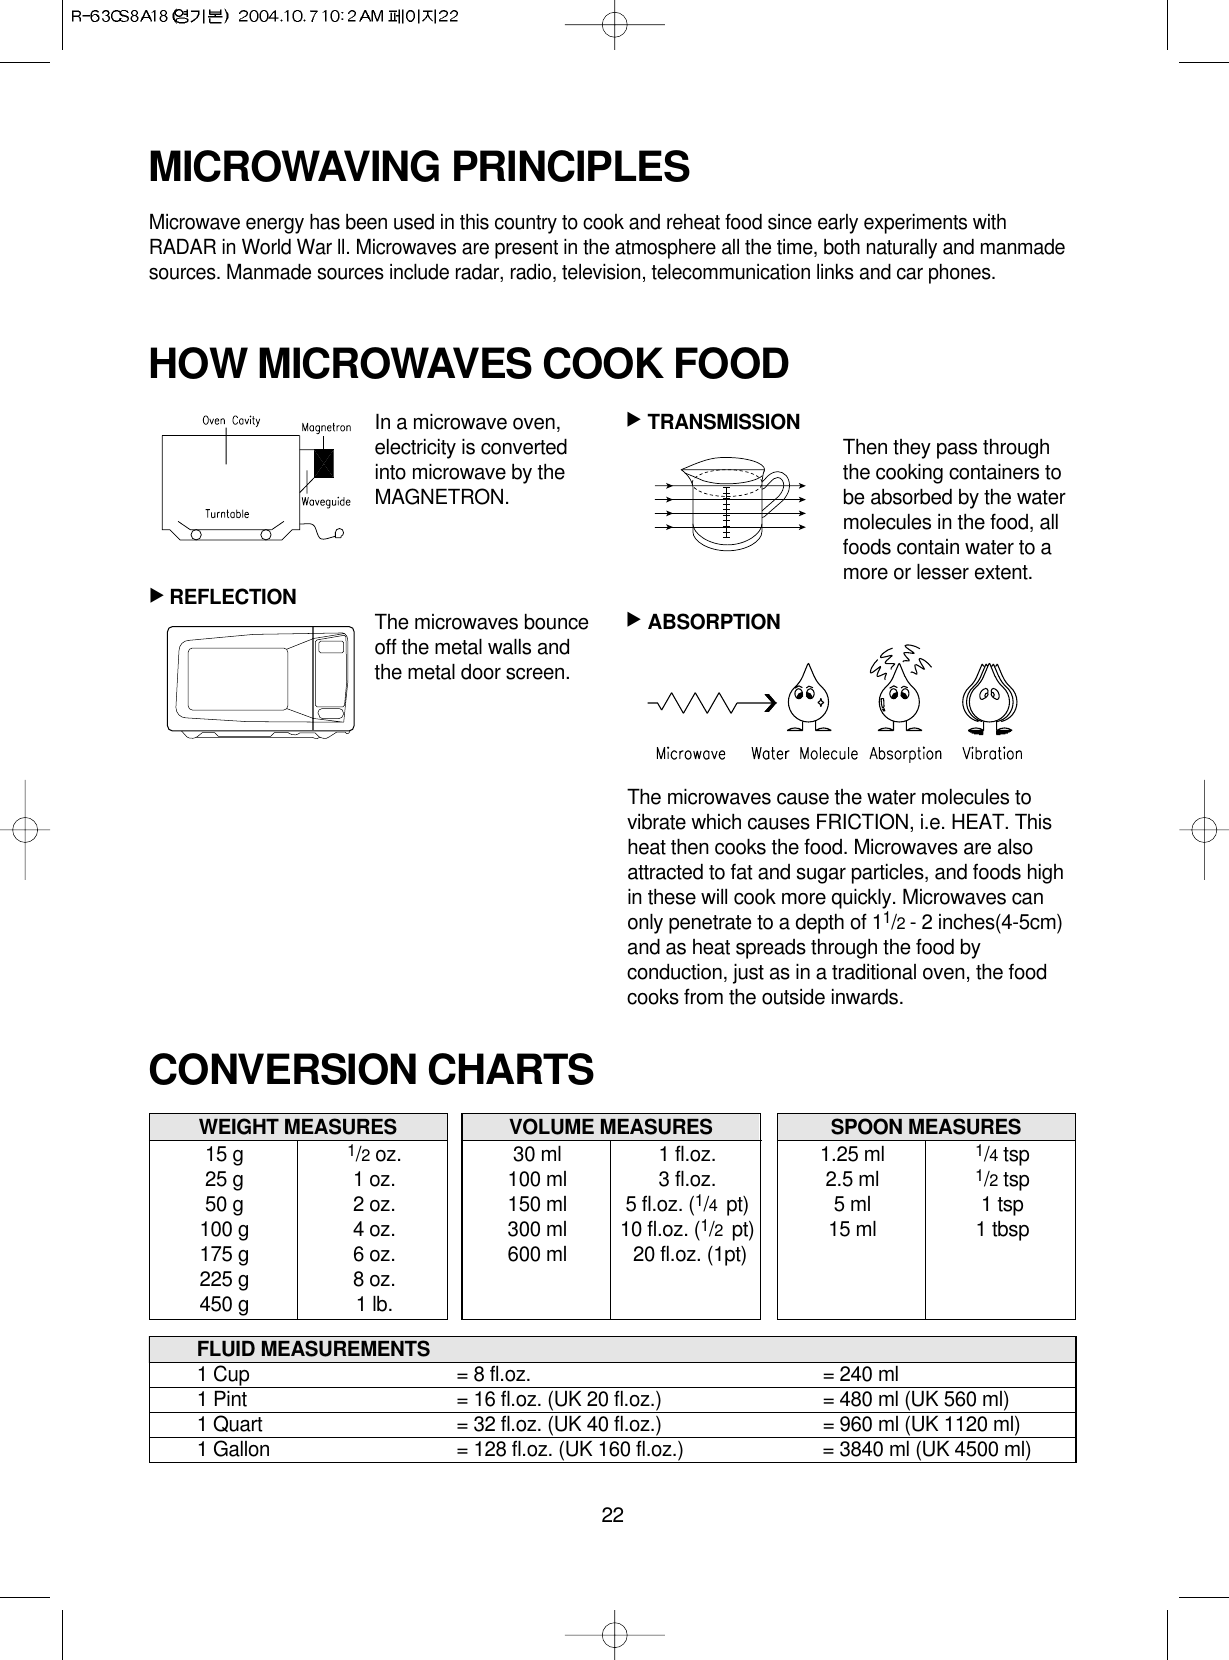 22MICROWAVING PRINCIPLESMicrowave energy has been used in this country to cook and reheat food since early experiments withRADAR in World War ll. Microwaves are present in the atmosphere all the time, both naturally and manmadesources. Manmade sources include radar, radio, television, telecommunication links and car phones.CONVERSION CHARTSIn a microwave oven,electricity is convertedinto microwave by theMAGNETRON.REFLECTION The microwaves bounceoff the metal walls andthe metal door screen.TRANSMISSION Then they pass throughthe cooking containers tobe absorbed by the watermolecules in the food, allfoods contain water to amore or lesser extent.ABSORPTIONThe microwaves cause the water molecules tovibrate which causes FRICTION, i.e. HEAT. Thisheat then cooks the food. Microwaves are alsoattracted to fat and sugar particles, and foods highin these will cook more quickly. Microwaves canonly penetrate to a depth of 11/2 - 2 inches(4-5cm)and as heat spreads through the food byconduction, just as in a traditional oven, the foodcooks from the outside inwards.WEIGHT MEASURES15 g 1/2oz.25 g 1 oz.50 g 2 oz.100 g 4 oz.175 g 6 oz.225 g 8 oz.450 g 1 lb.HOW MICROWAVES COOK FOOD▲▲▲VOLUME MEASURES30 ml 1 fl.oz.100 ml 3 fl.oz.150 ml 5 fl.oz. (1/4  pt)300 ml 10 fl.oz. (1/2  pt)600 ml 20 fl.oz. (1pt)SPOON MEASURES1.25 ml 1/4tsp2.5 ml 1/2tsp5 ml 1 tsp15 ml 1 tbspFLUID MEASUREMENTS1 Cup = 8 fl.oz. = 240 ml1 Pint = 16 fl.oz. (UK 20 fl.oz.) = 480 ml (UK 560 ml)1 Quart = 32 fl.oz. (UK 40 fl.oz.) = 960 ml (UK 1120 ml)1 Gallon = 128 fl.oz. (UK 160 fl.oz.) = 3840 ml (UK 4500 ml)